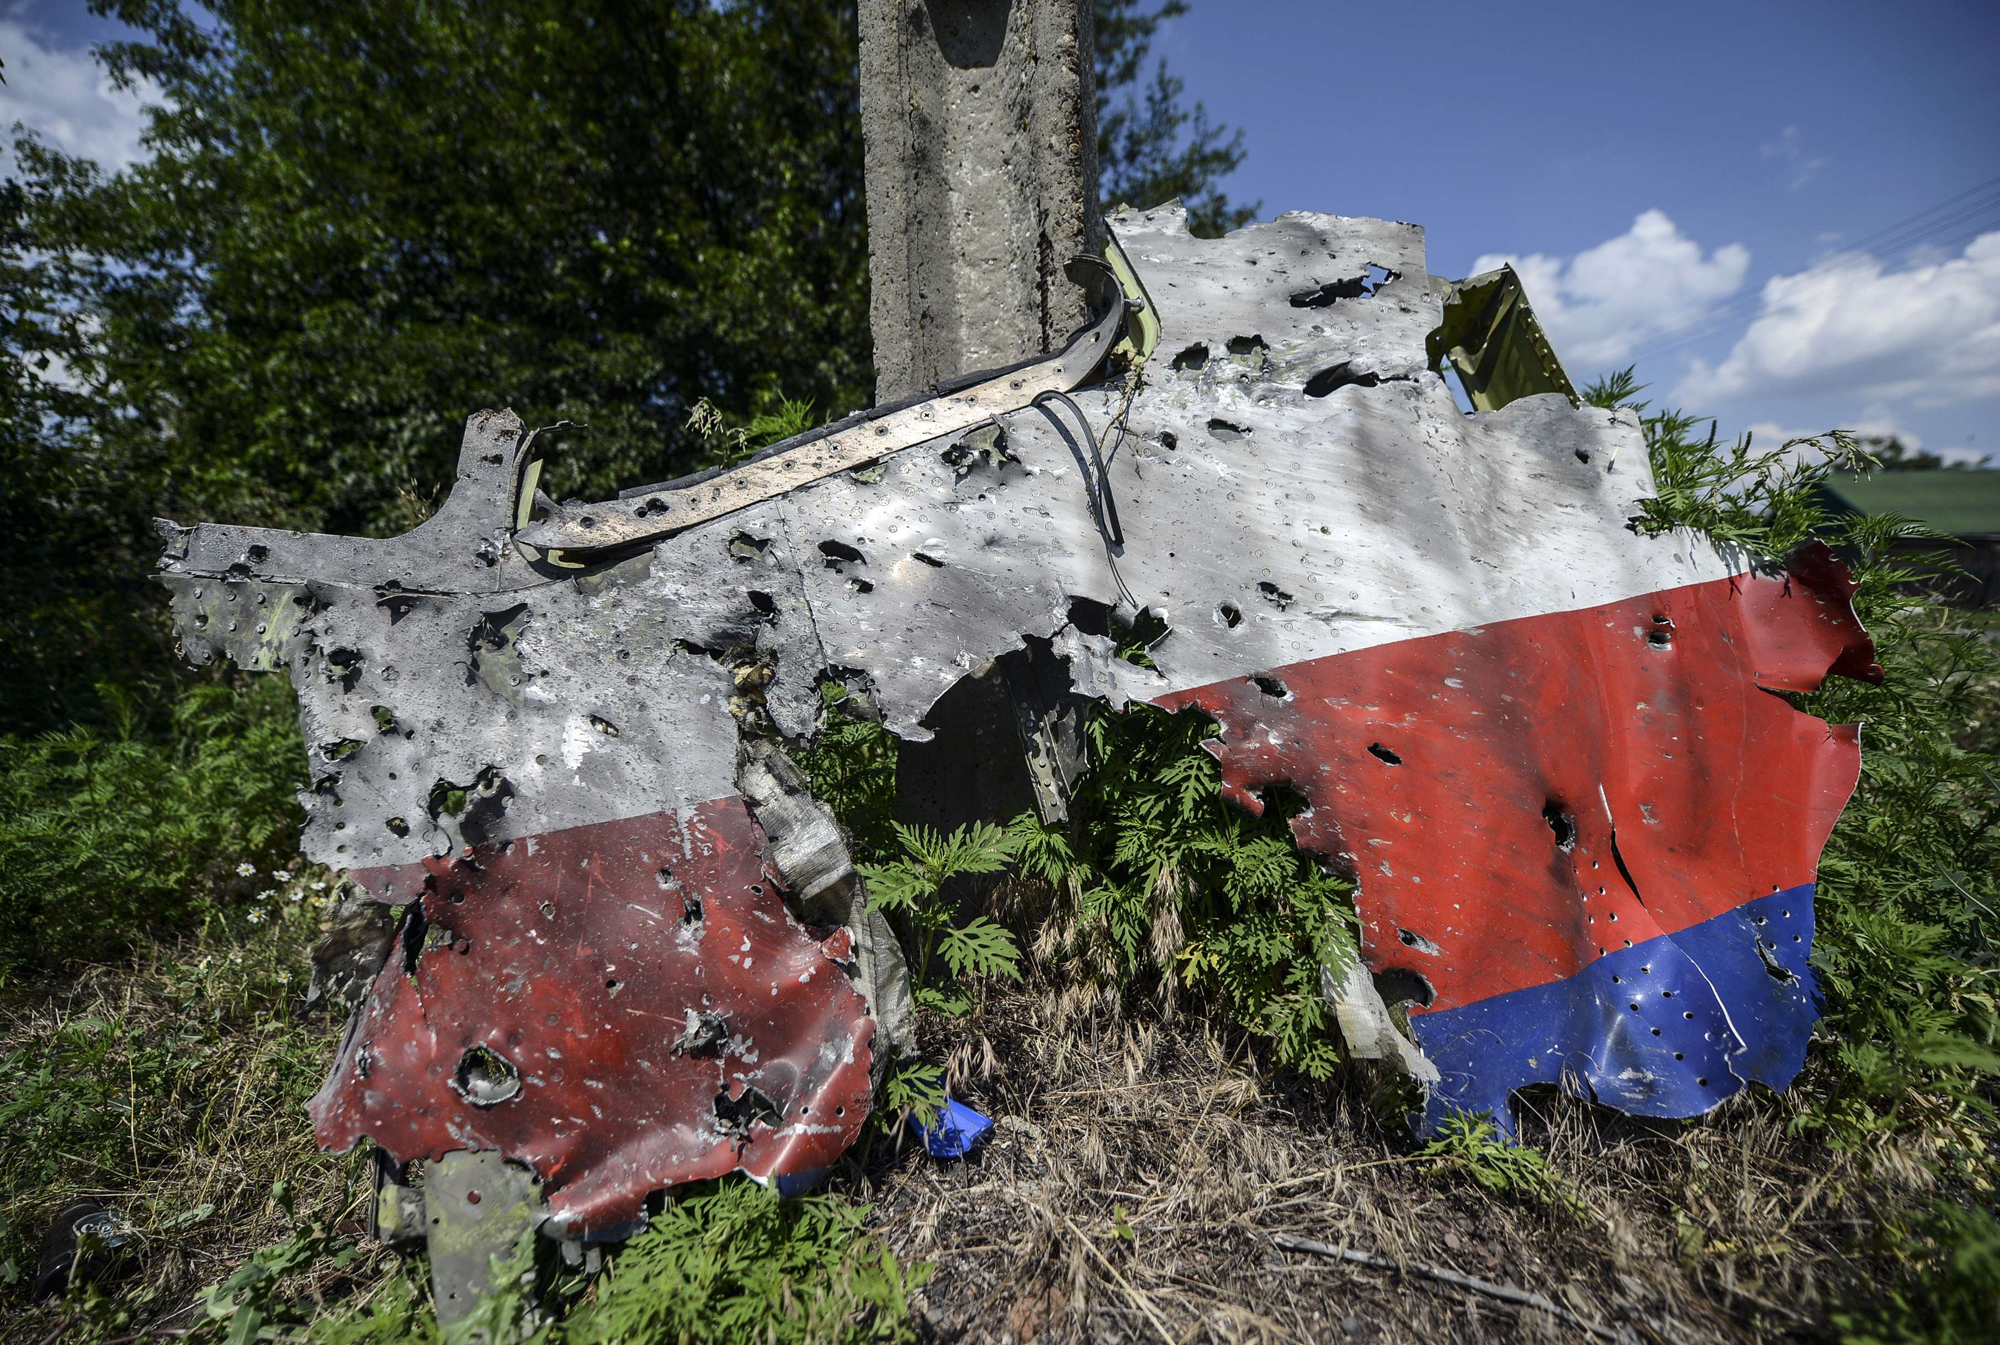 A part of the fuselage of the downed Malaysia Airlines flight MH17 is pictured in a field near the village of Grabove, in the Donetsk region, on July 23, 2014.